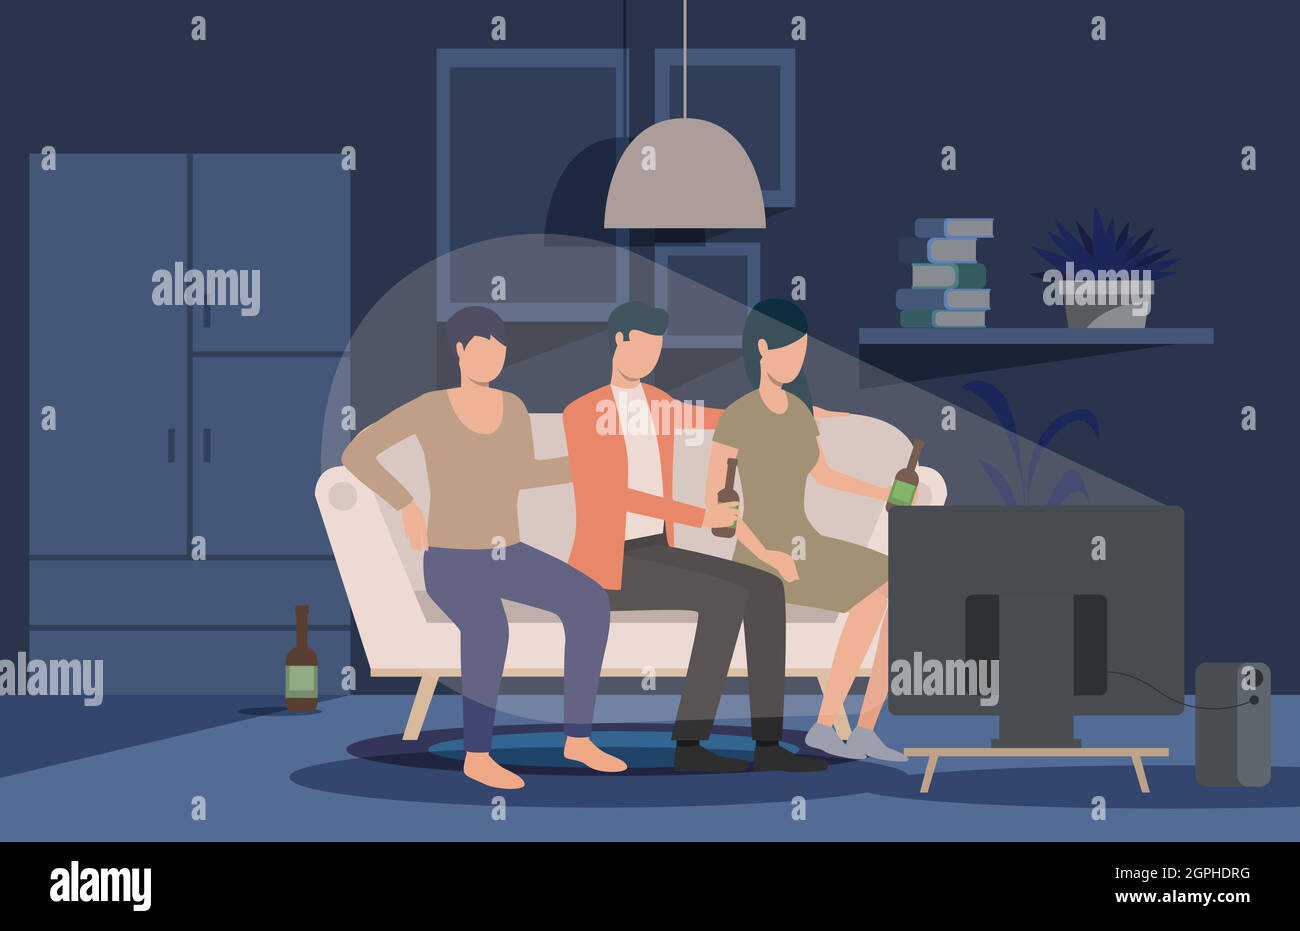 Friends watching movie at home landing page Stock Vector